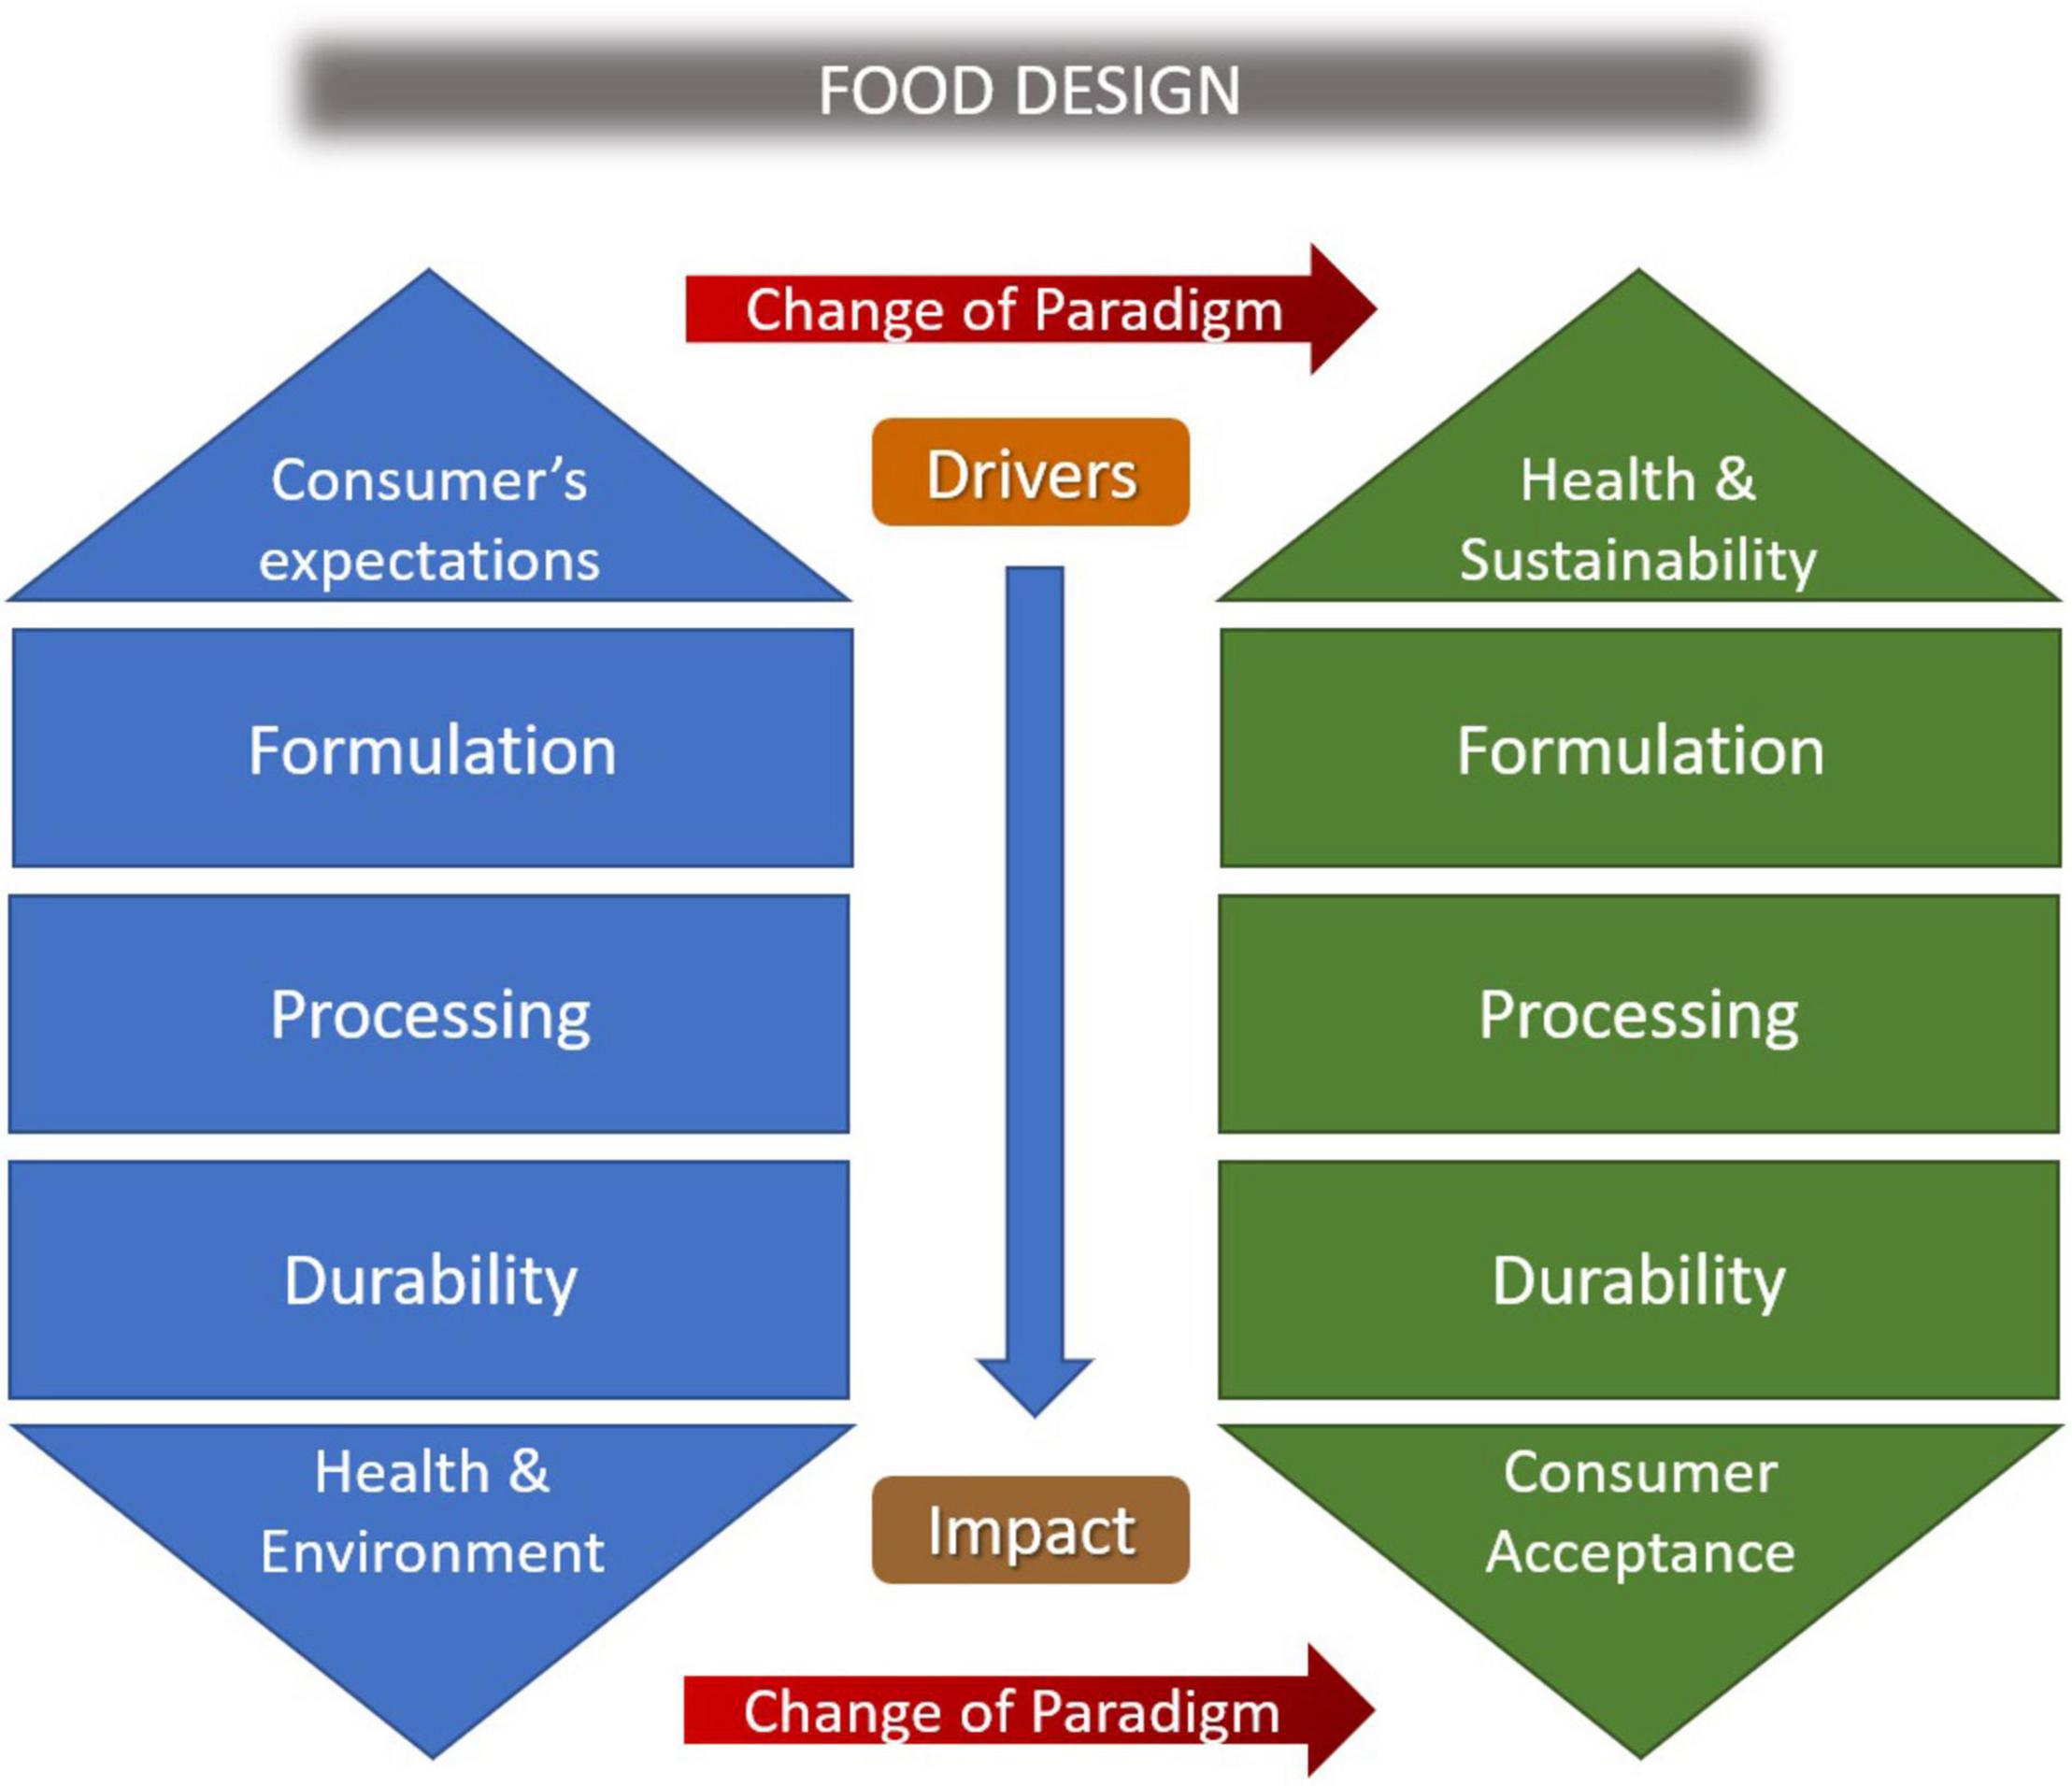 Frontiers Food Innovation in the Frame of Circular Economy by